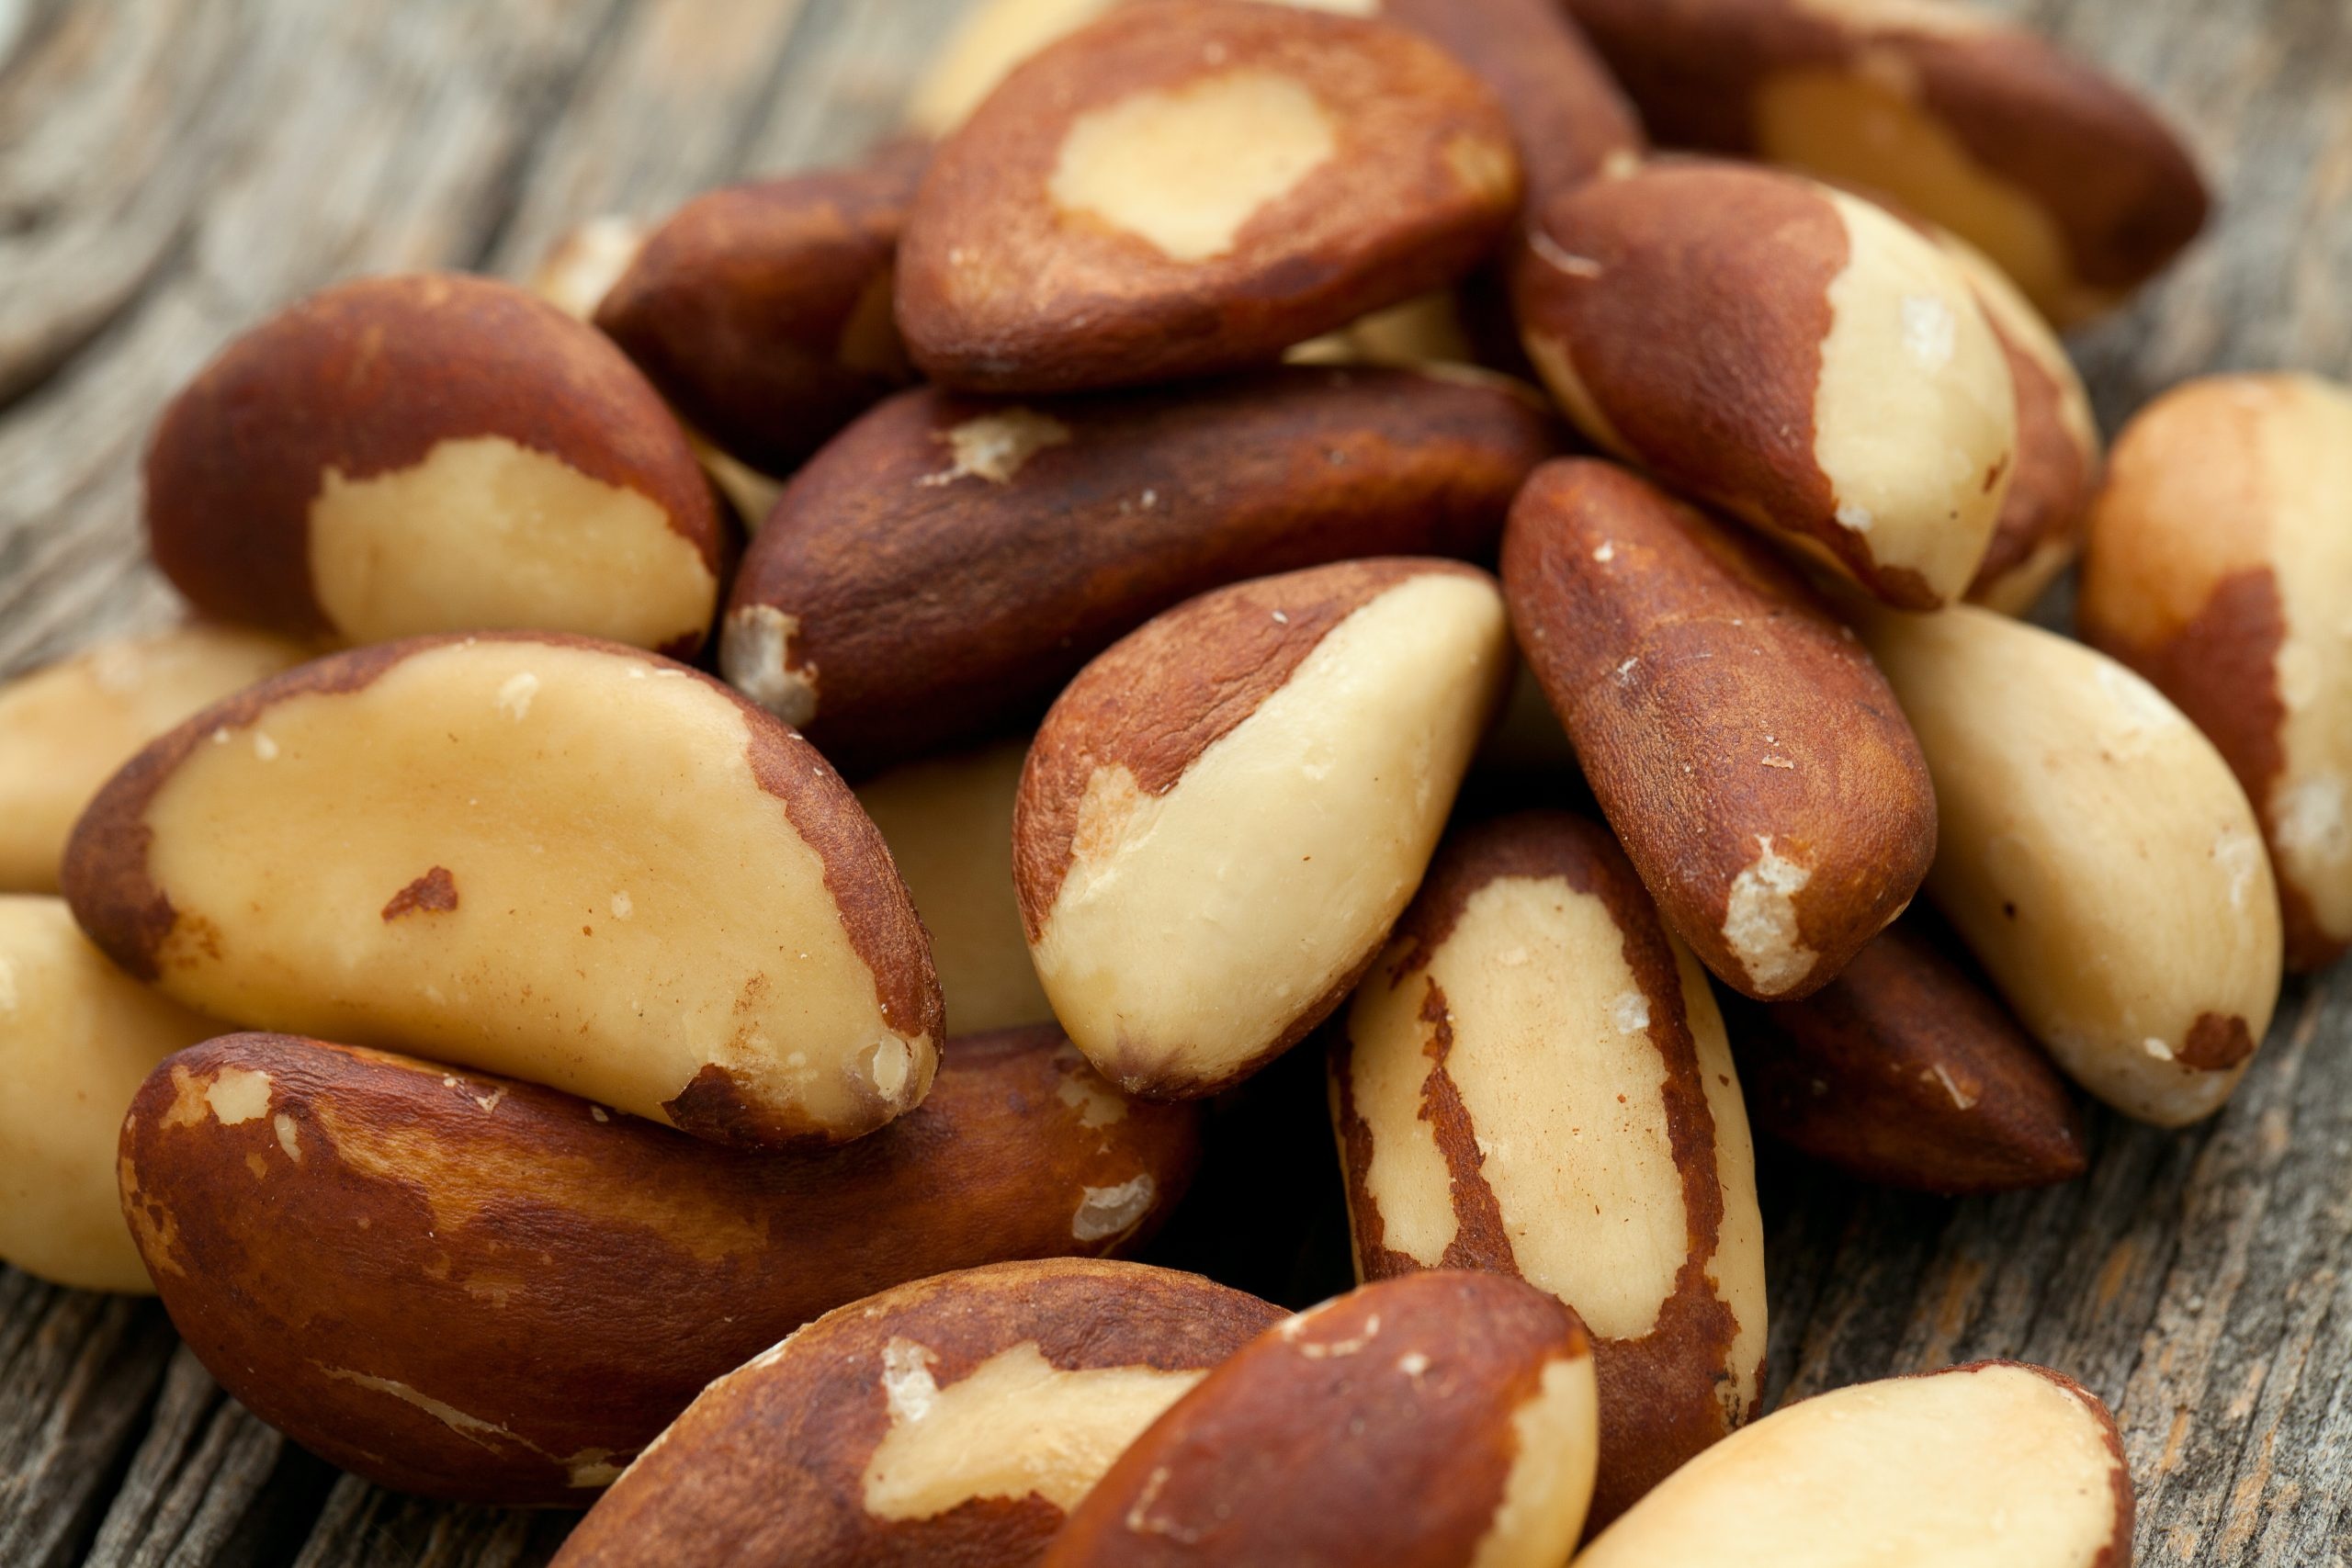 Brazil Nuts: Notable for diverse content of micronutrients, A high amount of selenium. 2560x1710 HD Wallpaper.